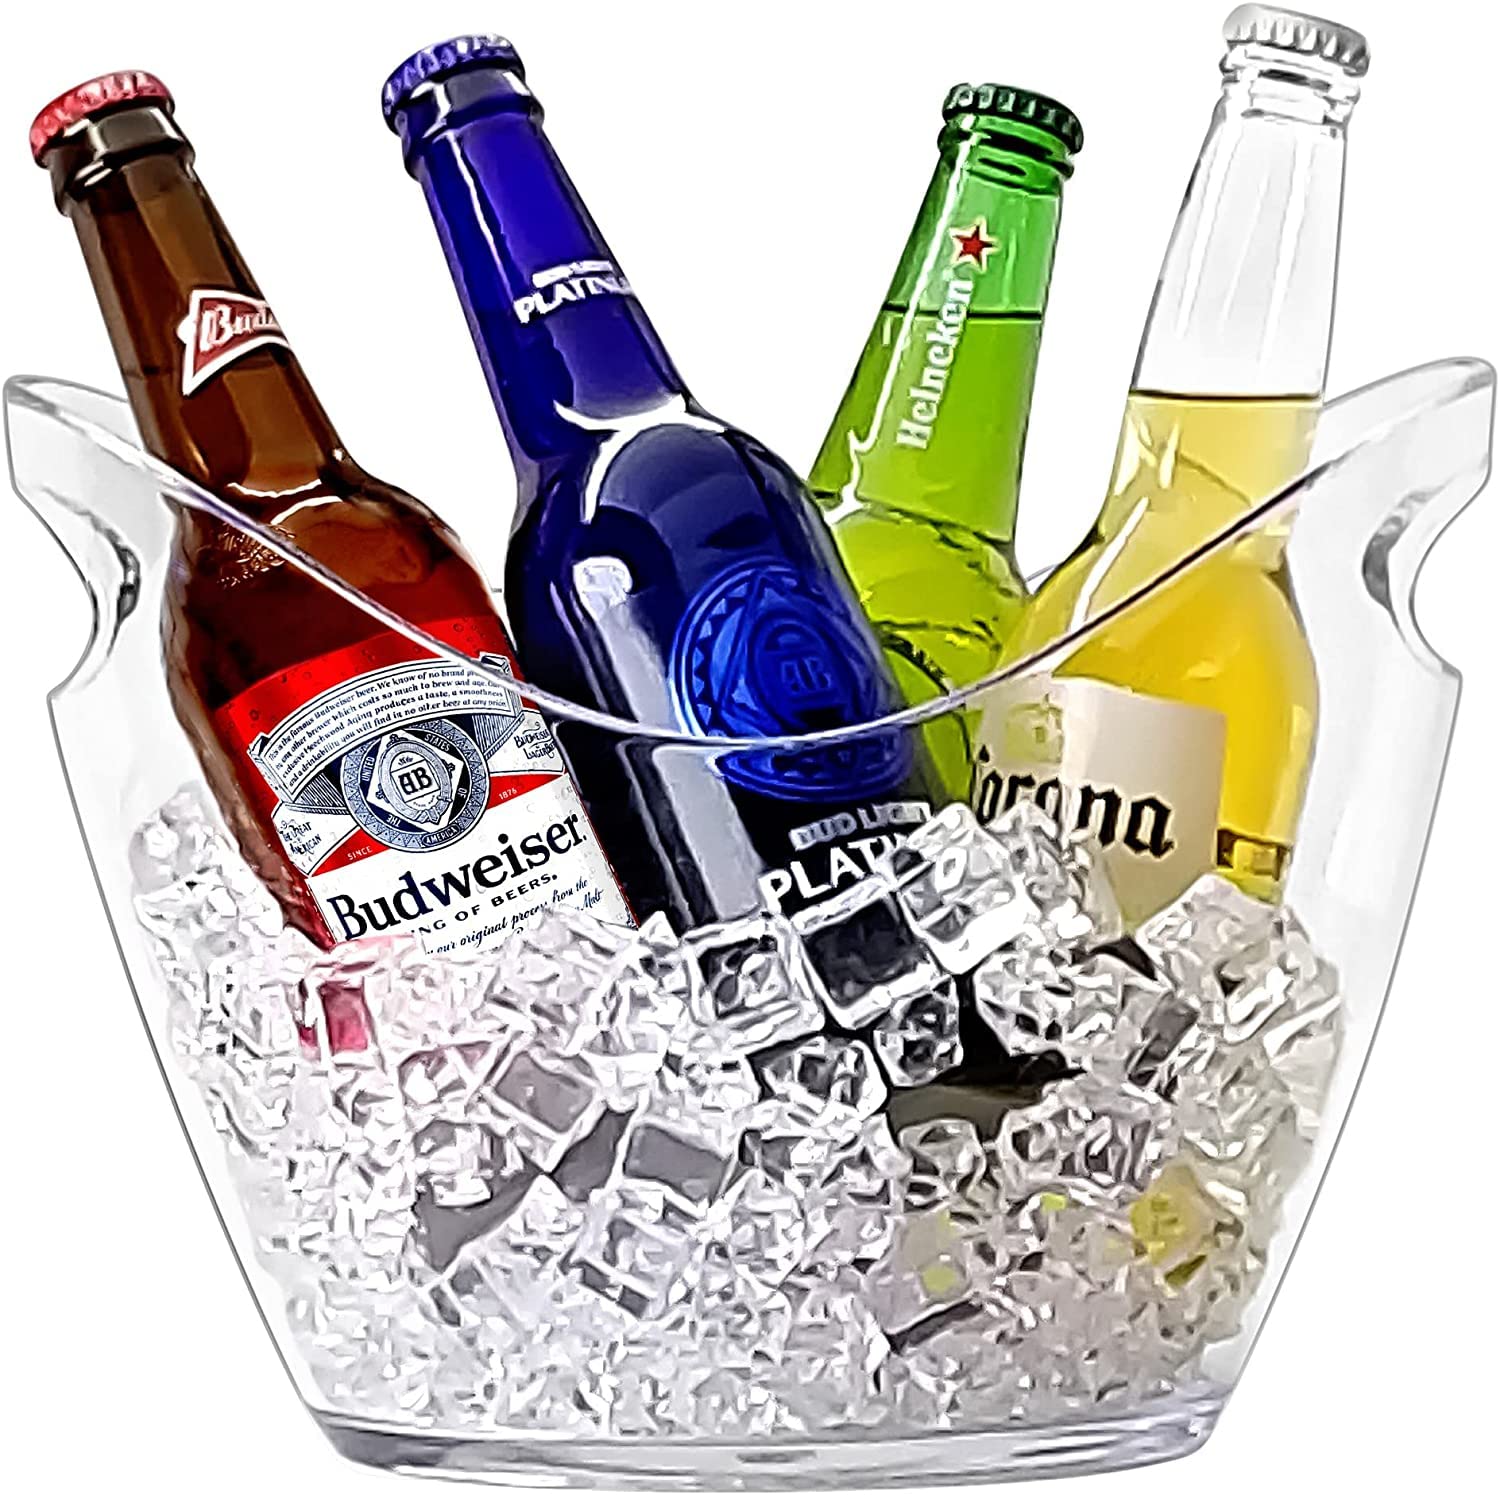 NJ Ice Buckets for Parties - Clear Beer Bucket Tub, Ice Bucket for Beer, Ice Bucket, Wine Bucket, Beer Bucket for Party, for Bar and Home Party : 1 Pc.